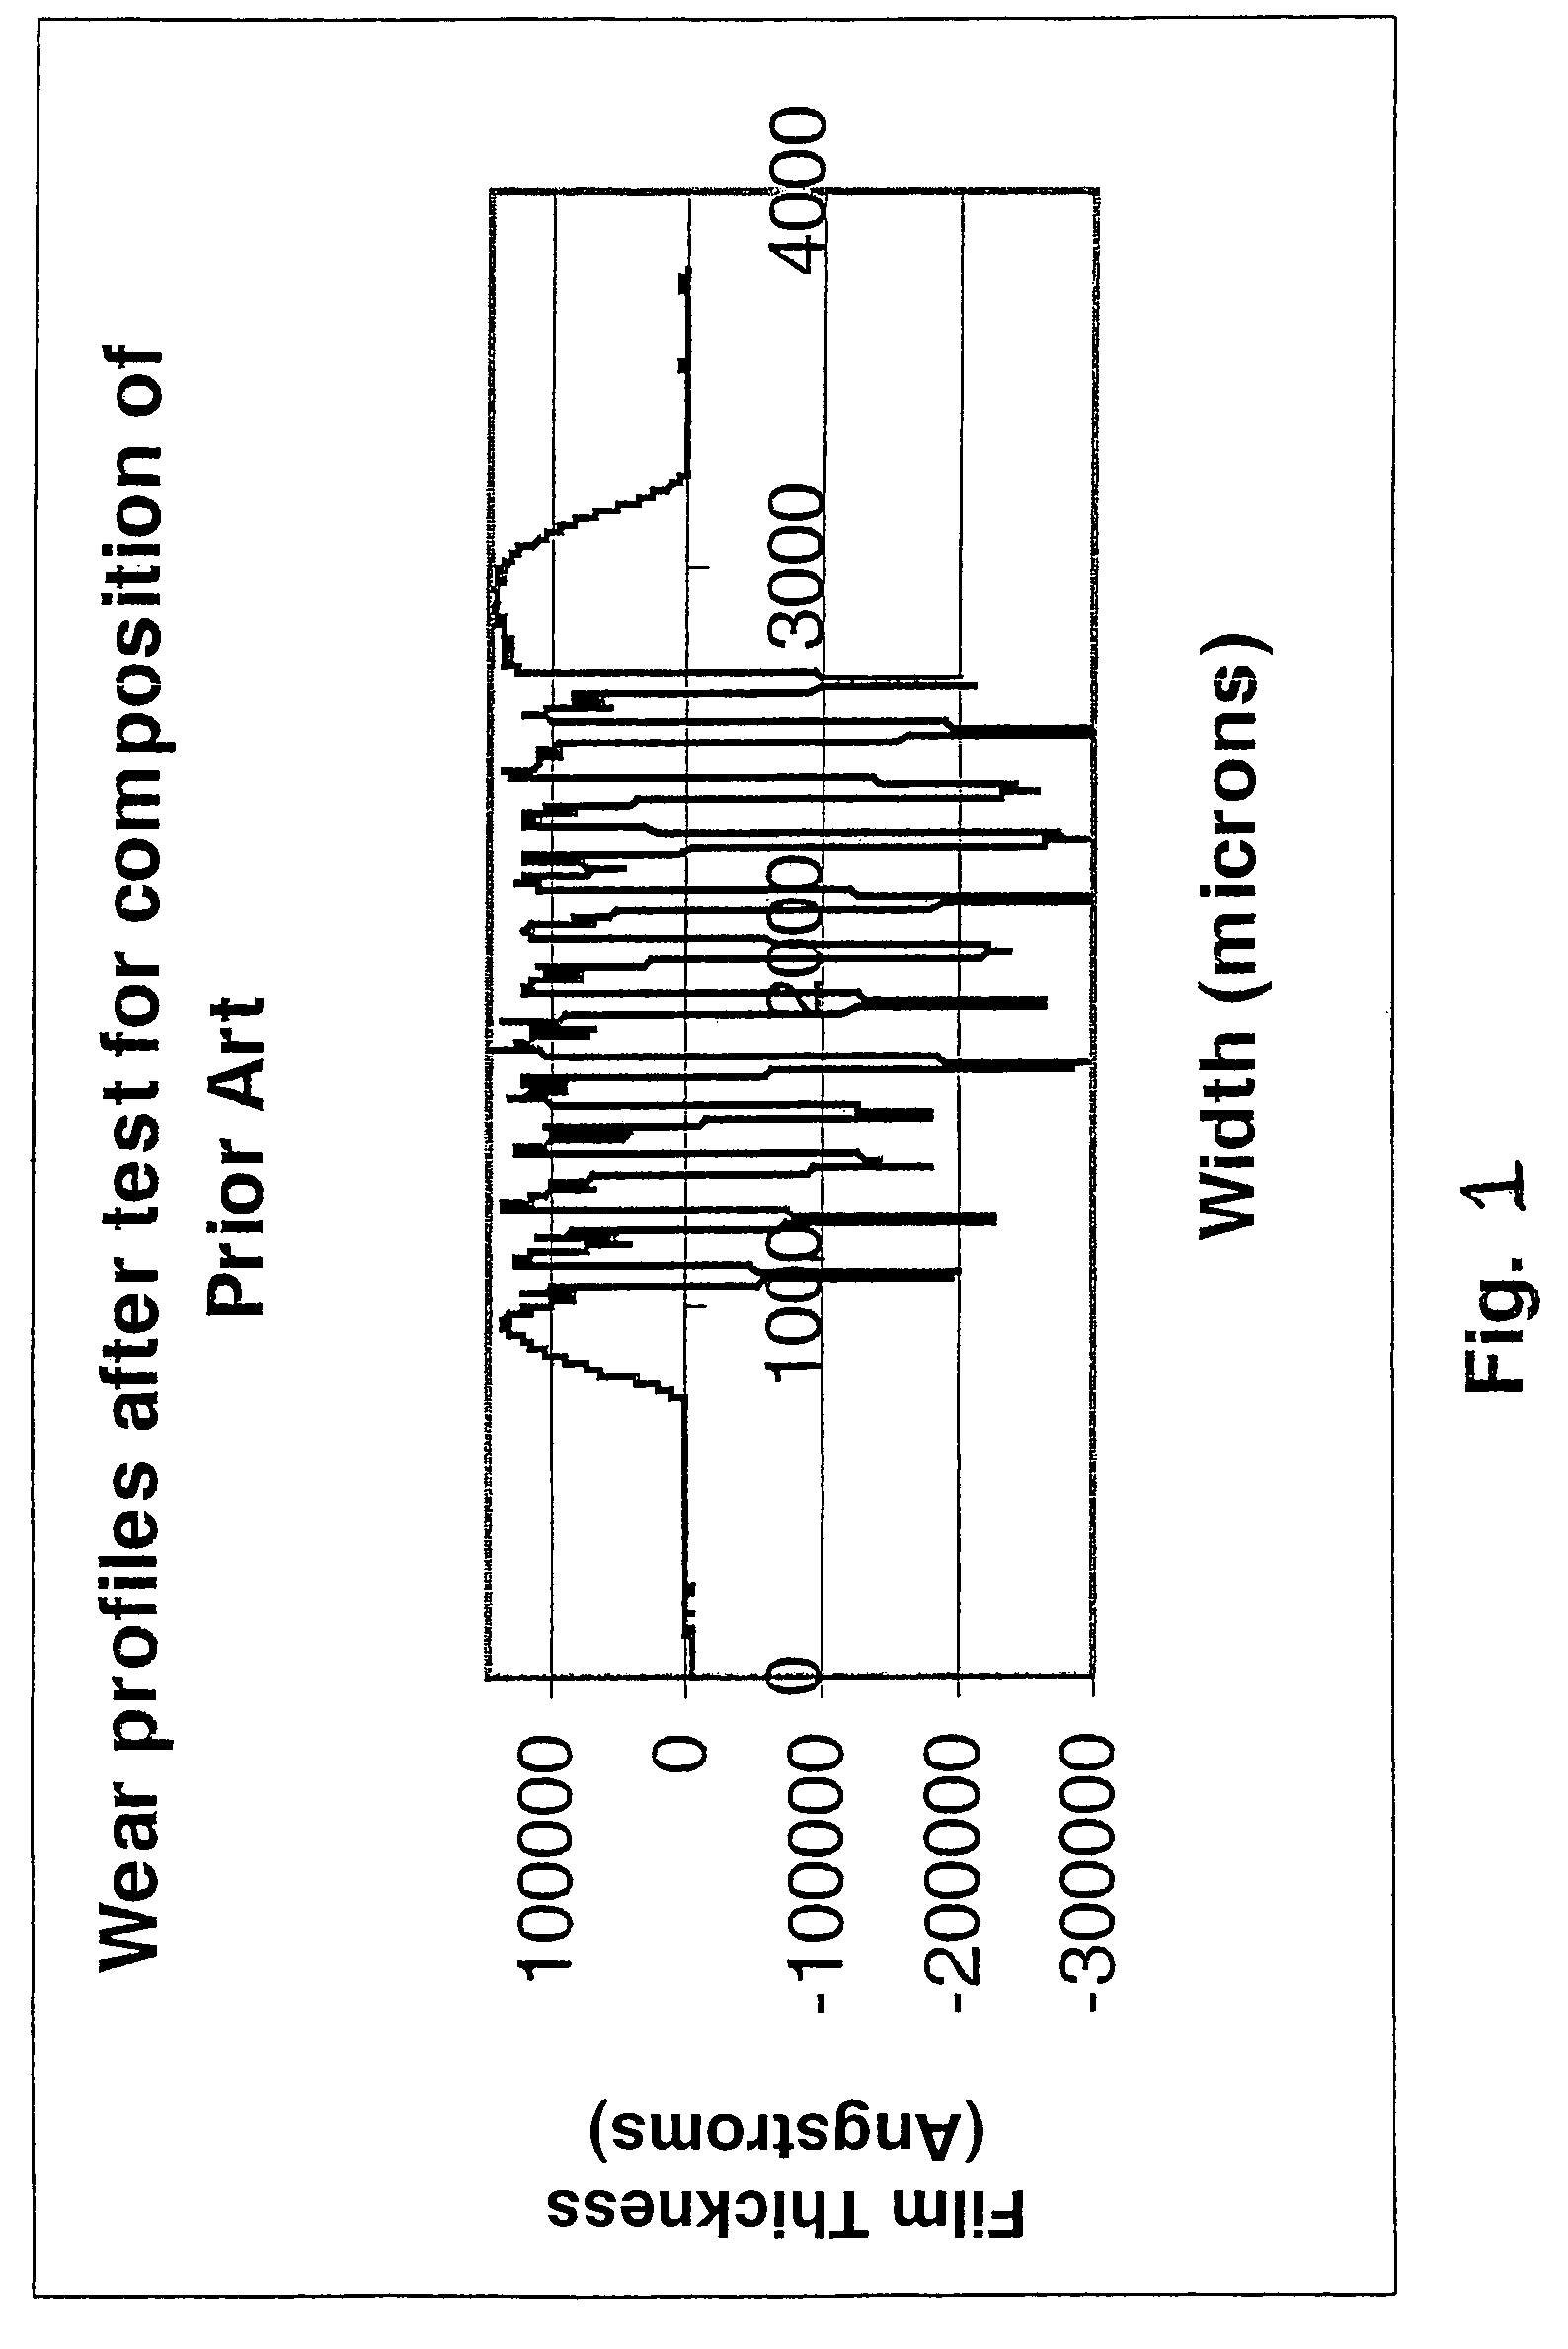 Polymer conductive composition containing zirconia for films and coatings with high wear resistance